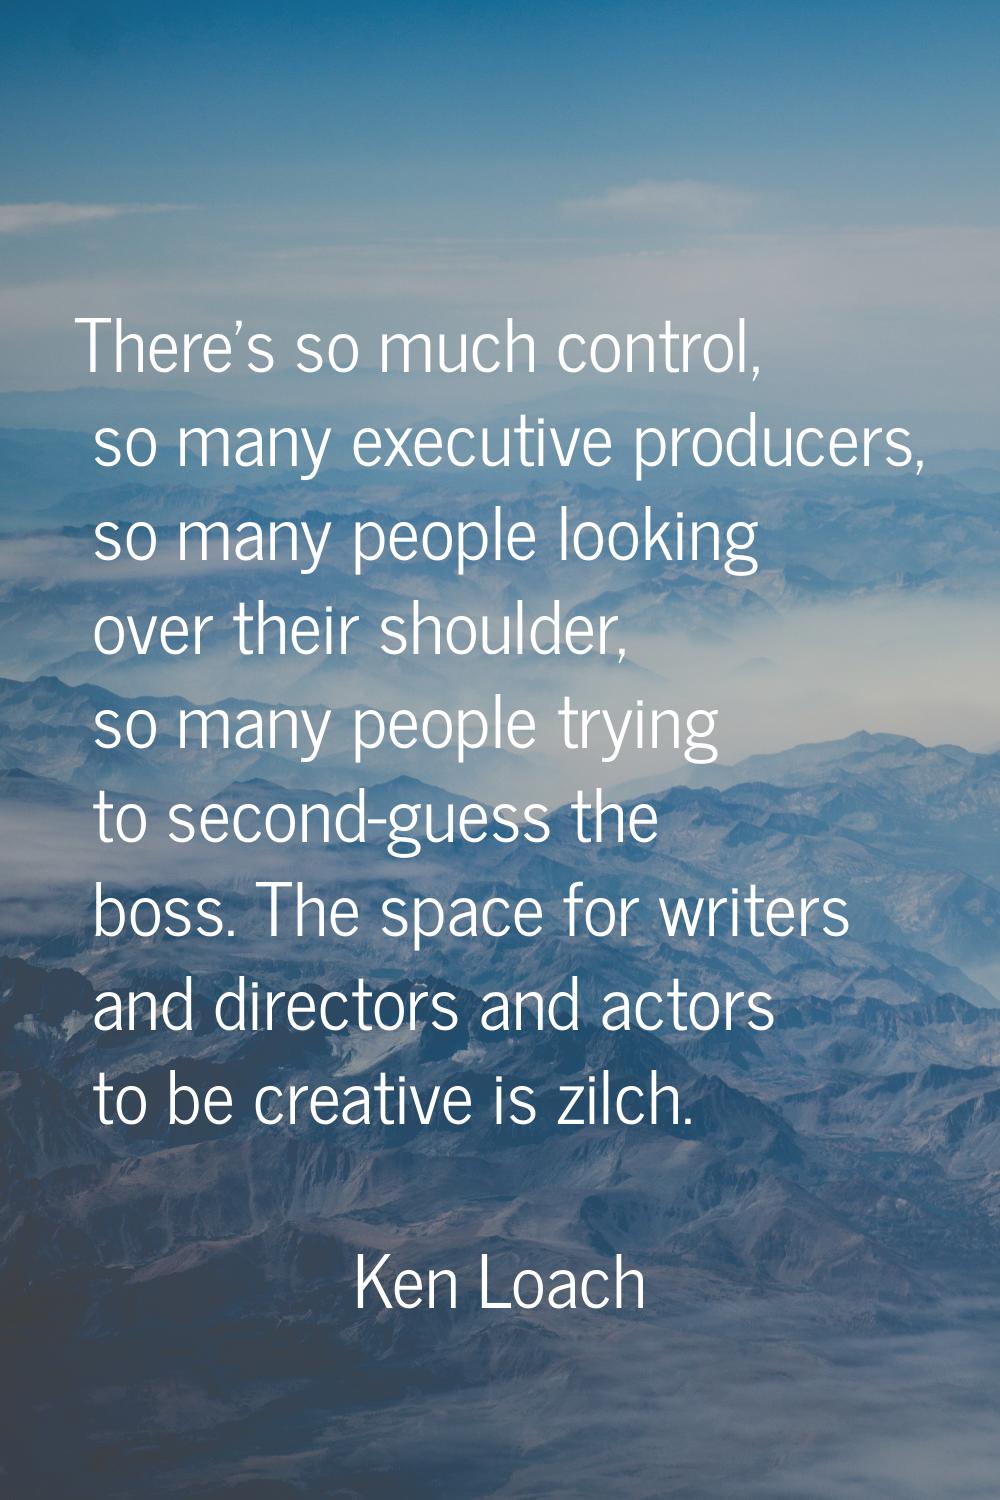 There's so much control, so many executive producers, so many people looking over their shoulder, s